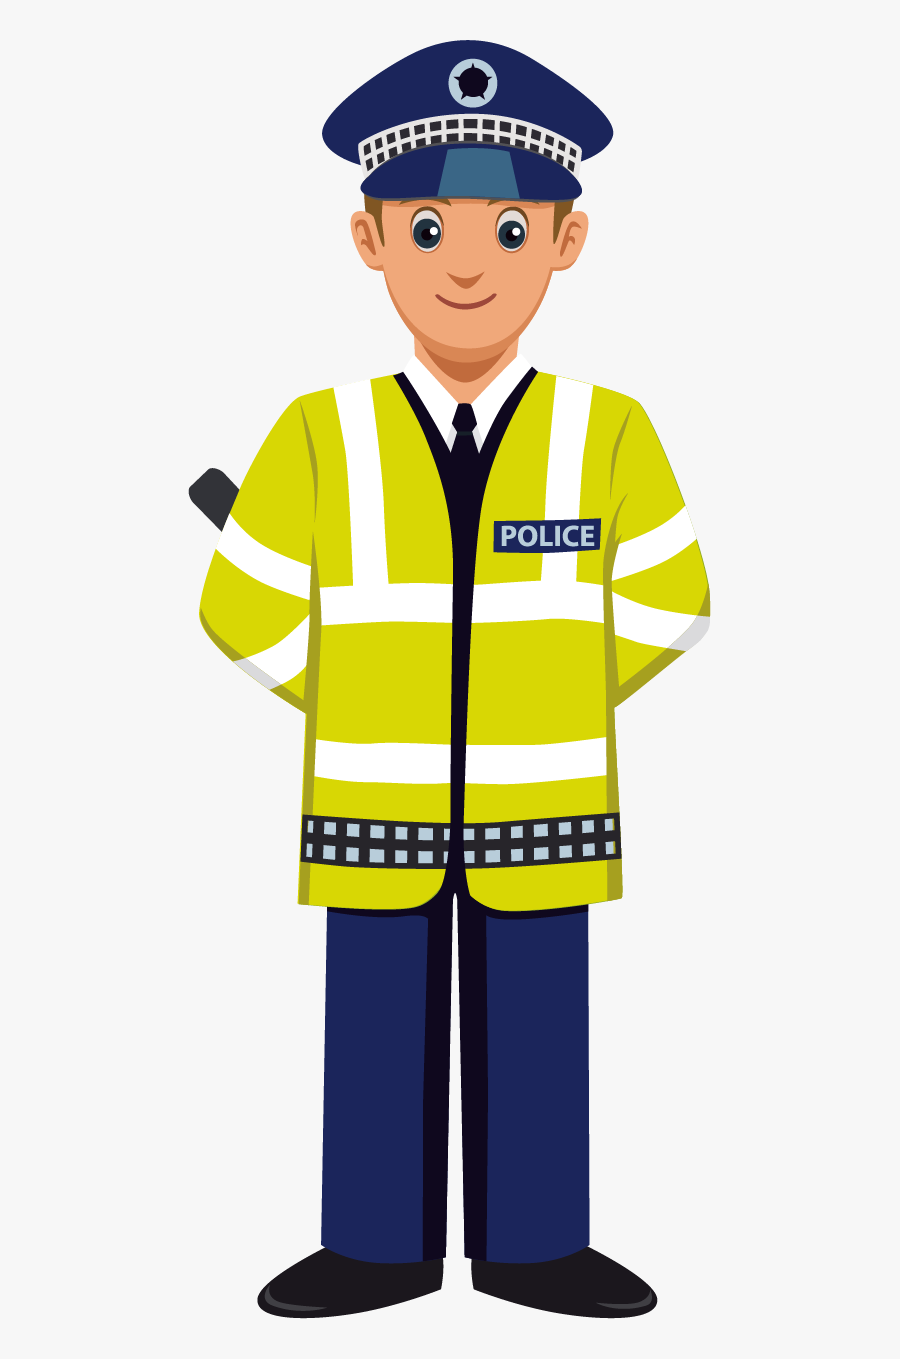 Traffic Police Police Officer Clip Art - Traffic Police Png, Transparent Clipart